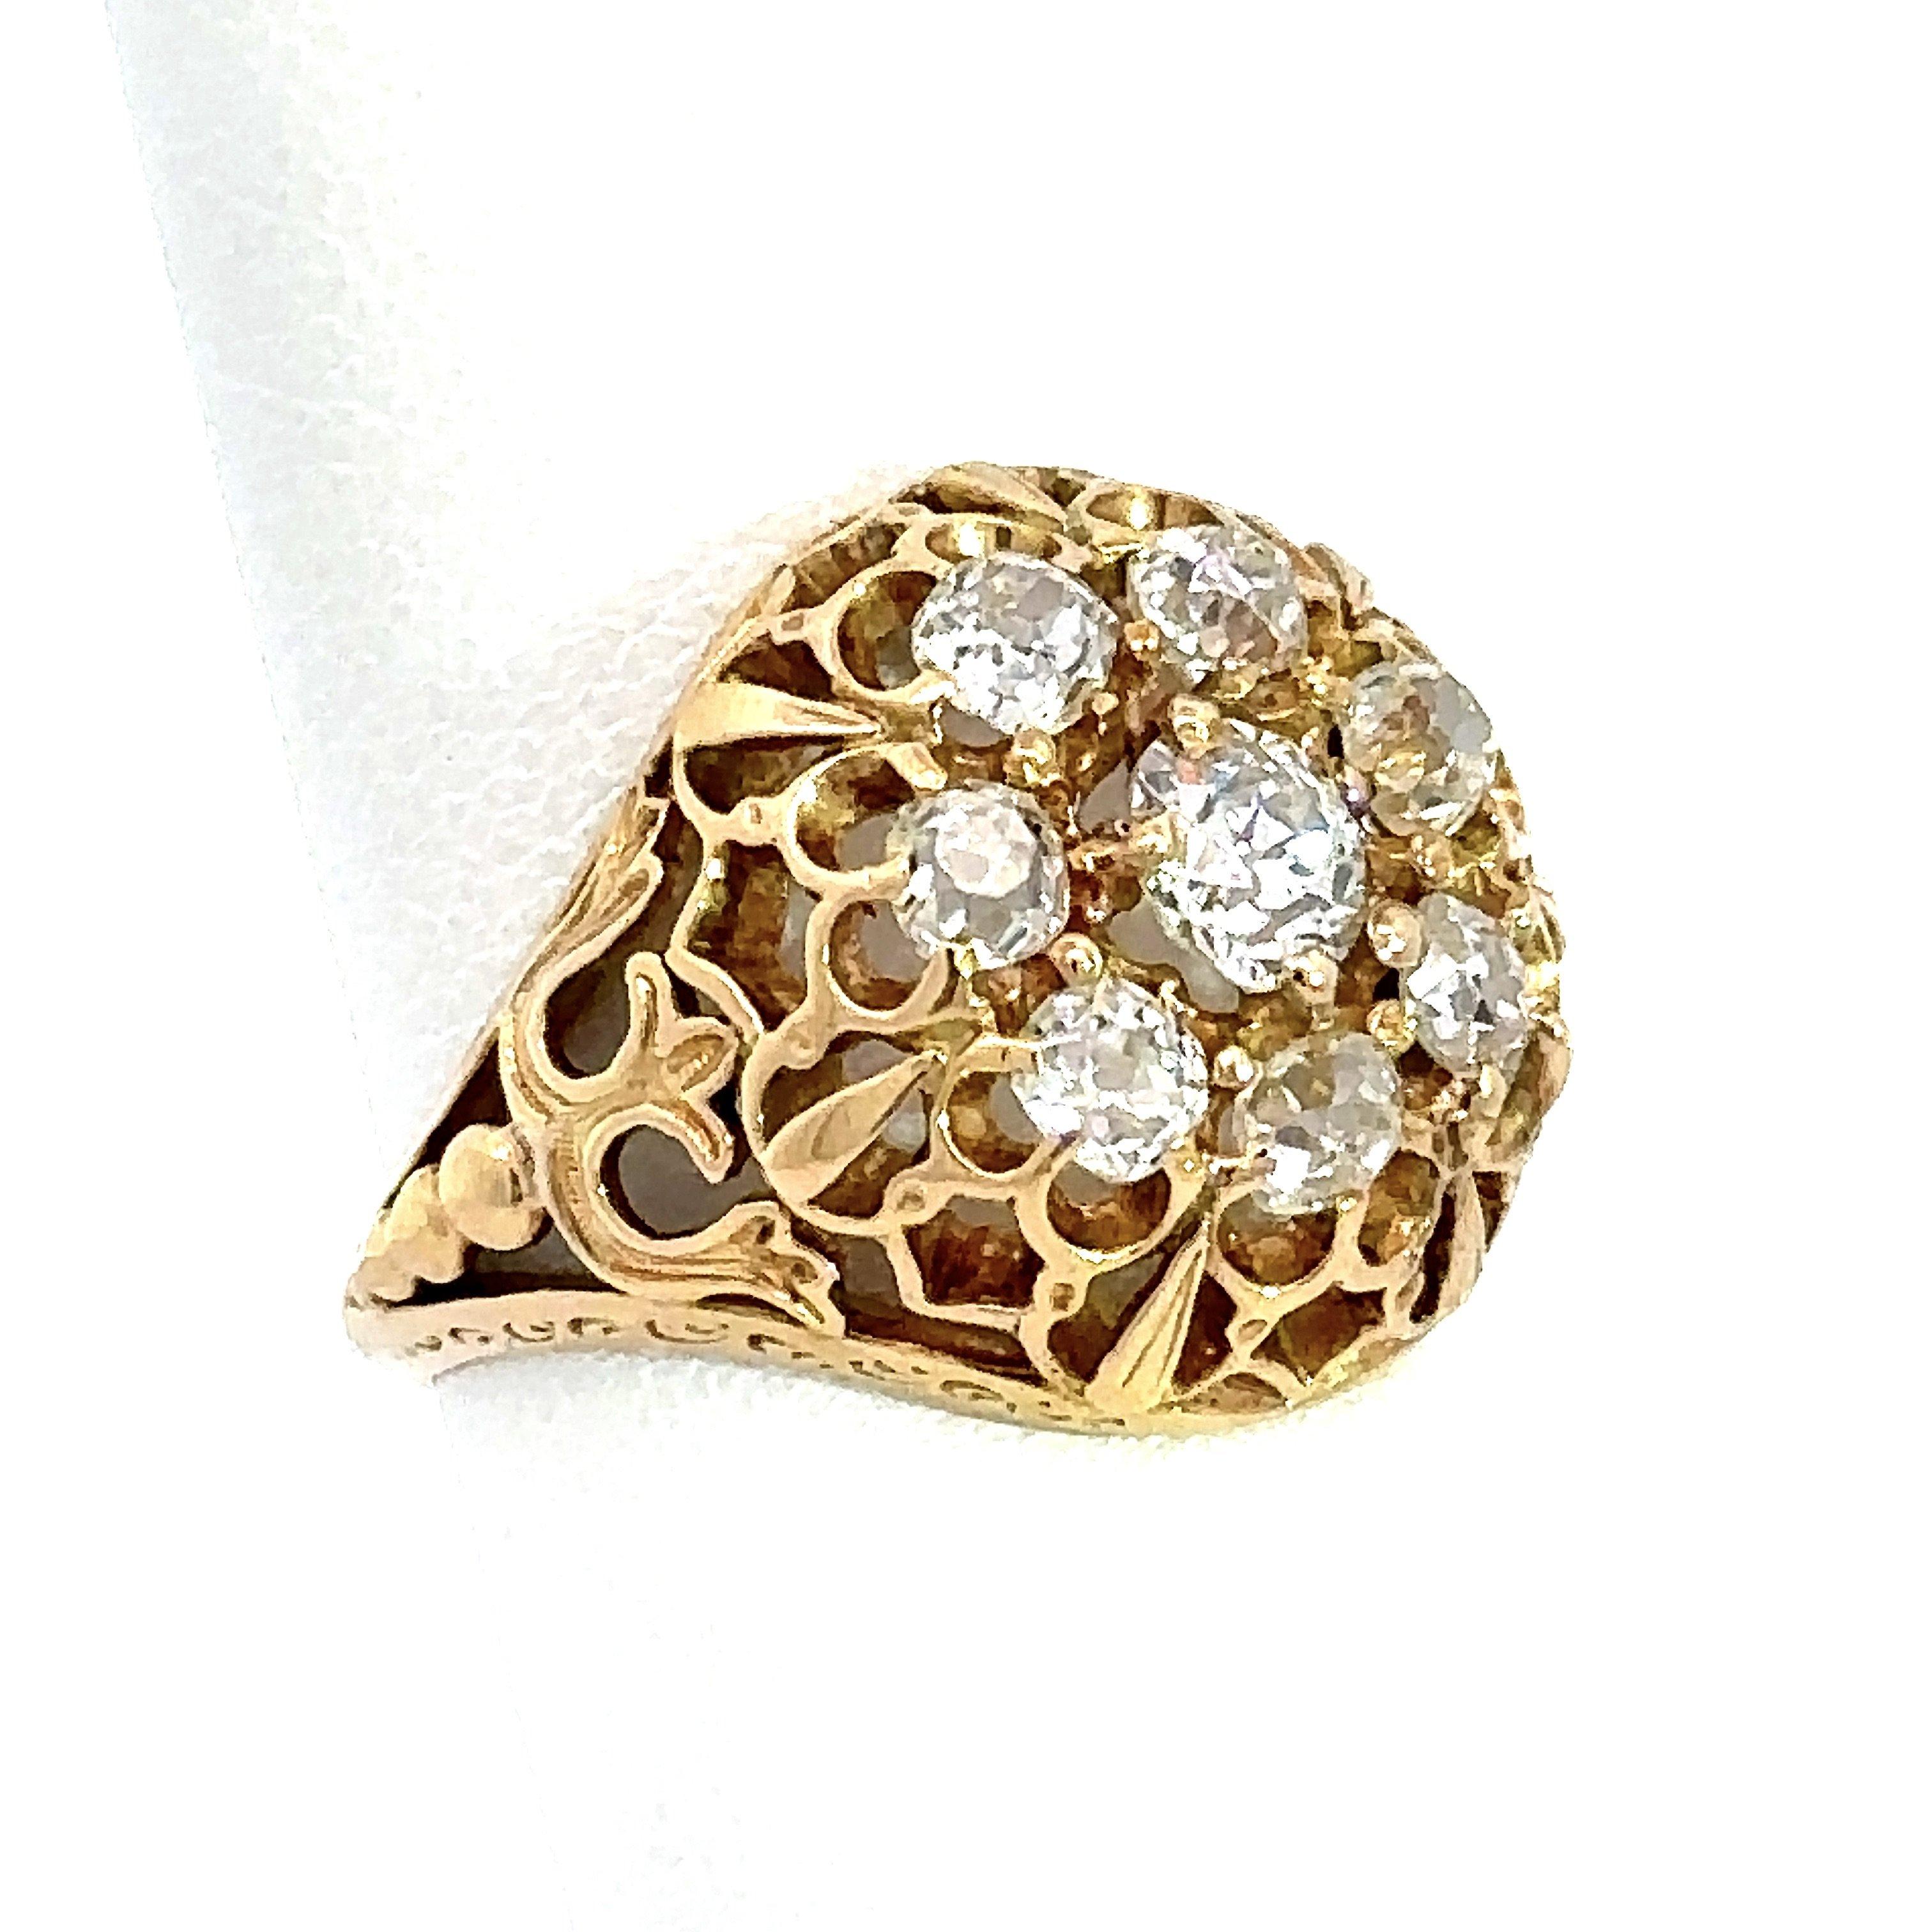 Victorian Antique 18KT Gold 1.5CT Diamond Domed Cluster Ring, Engraved 1861